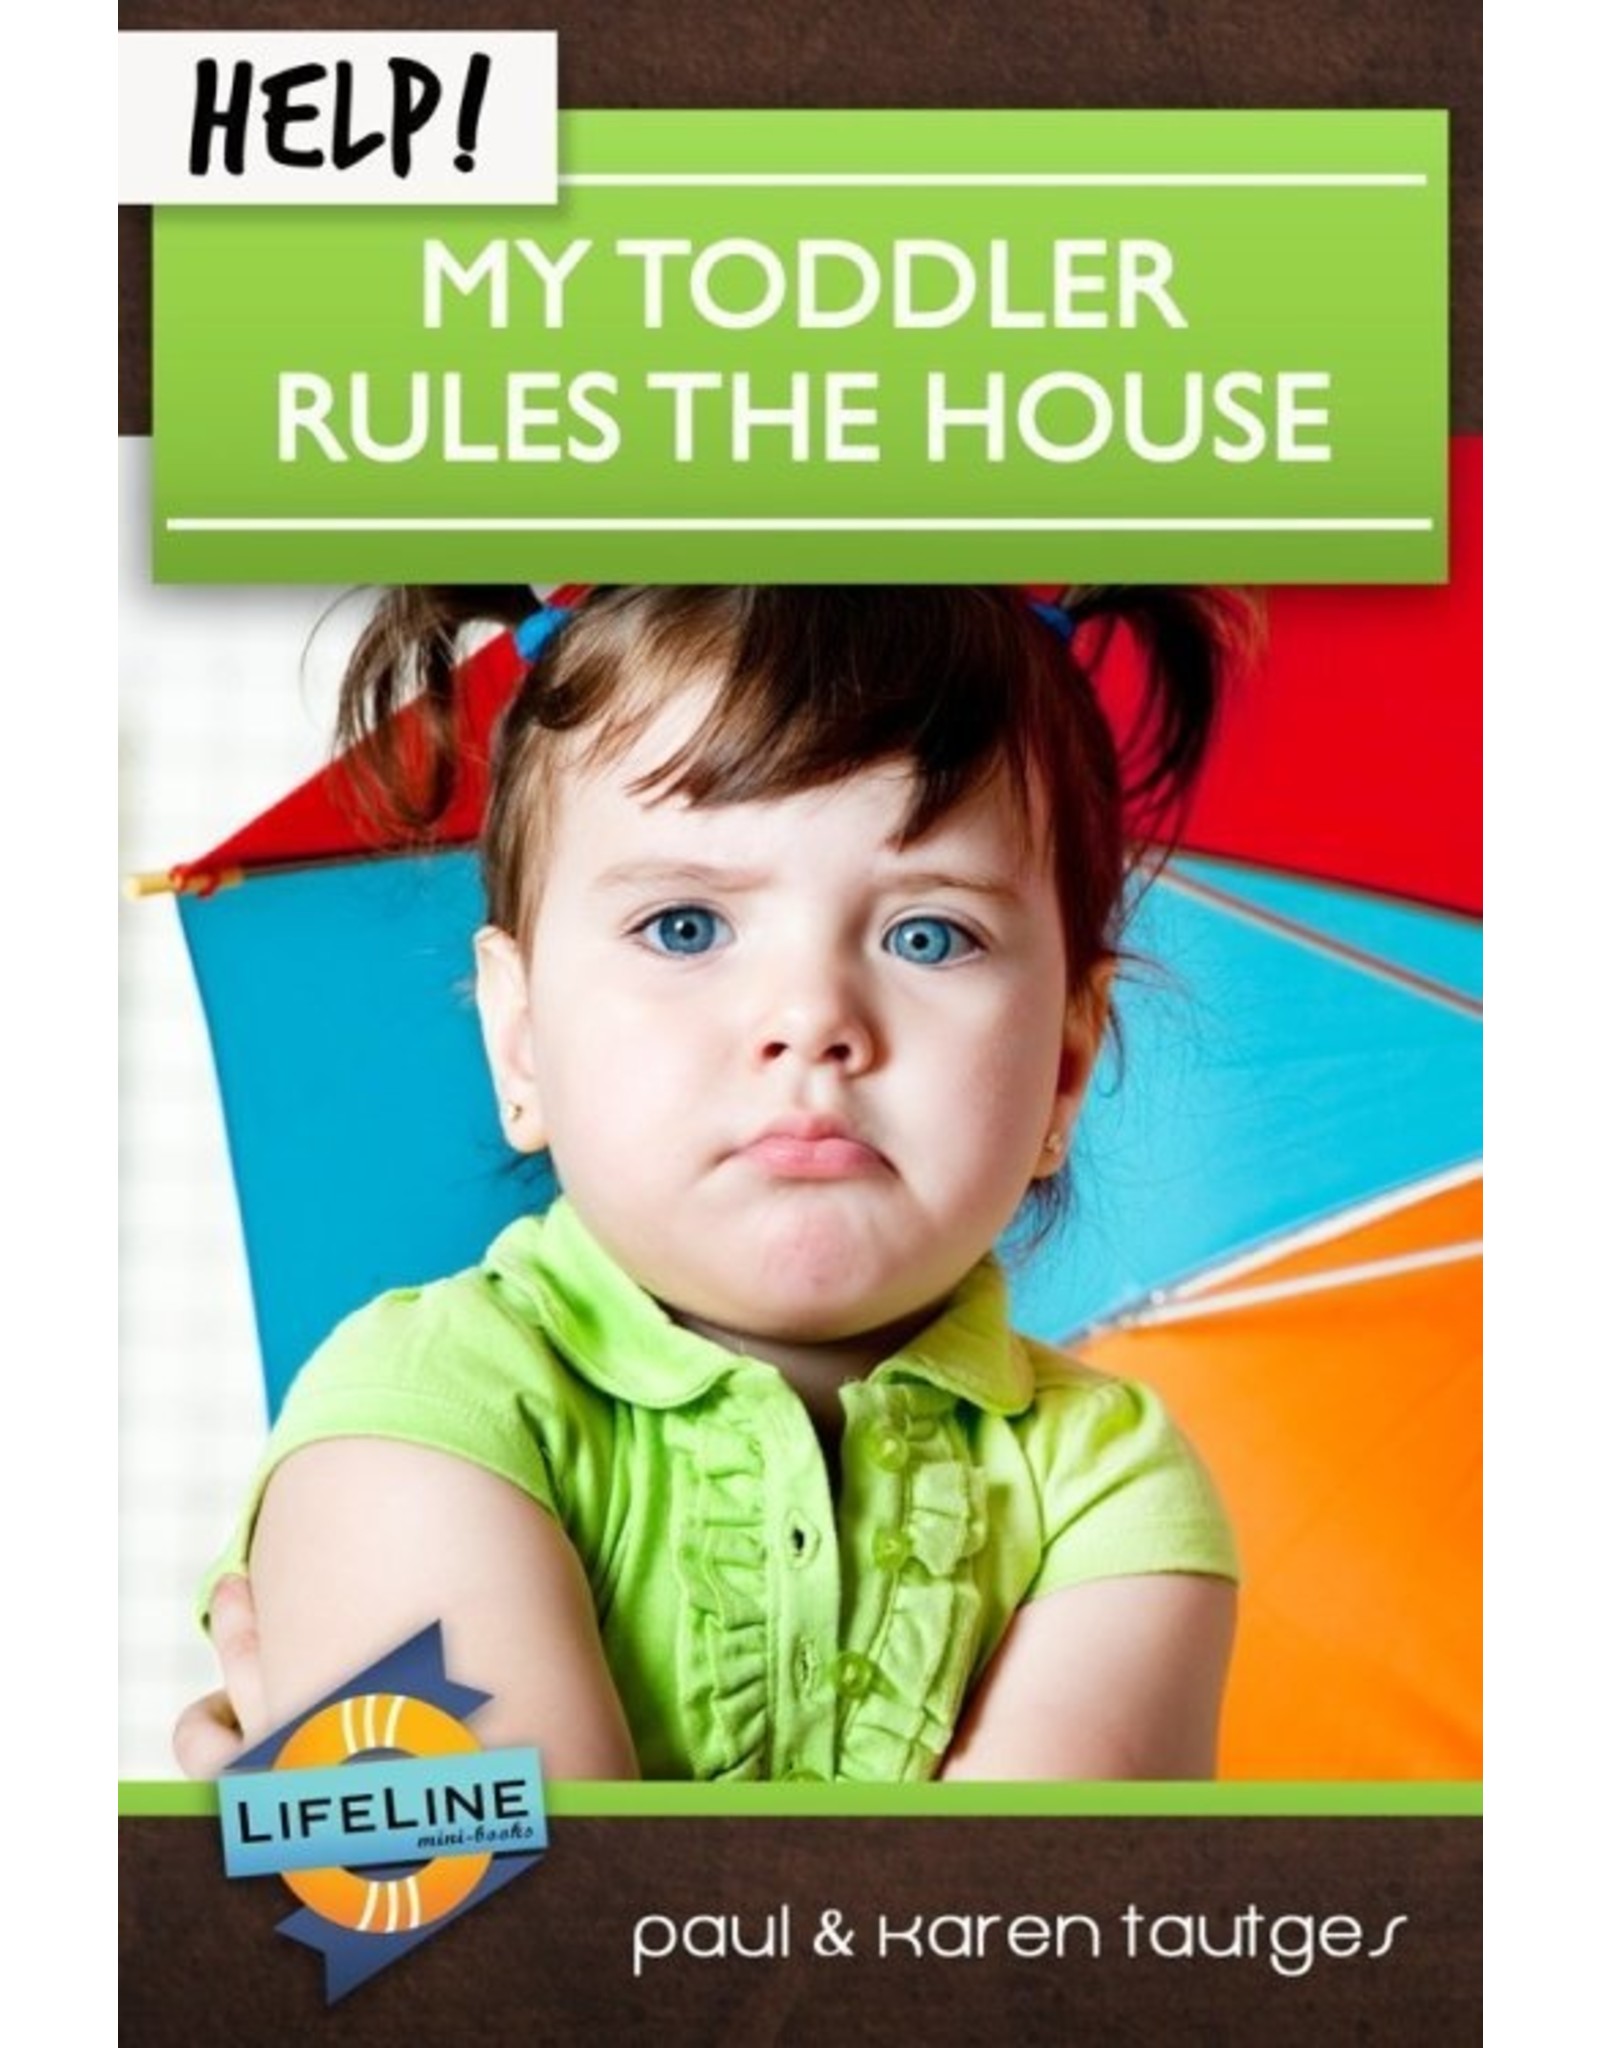 Paul & Karen Tautges Help! My Toddler Rules the House